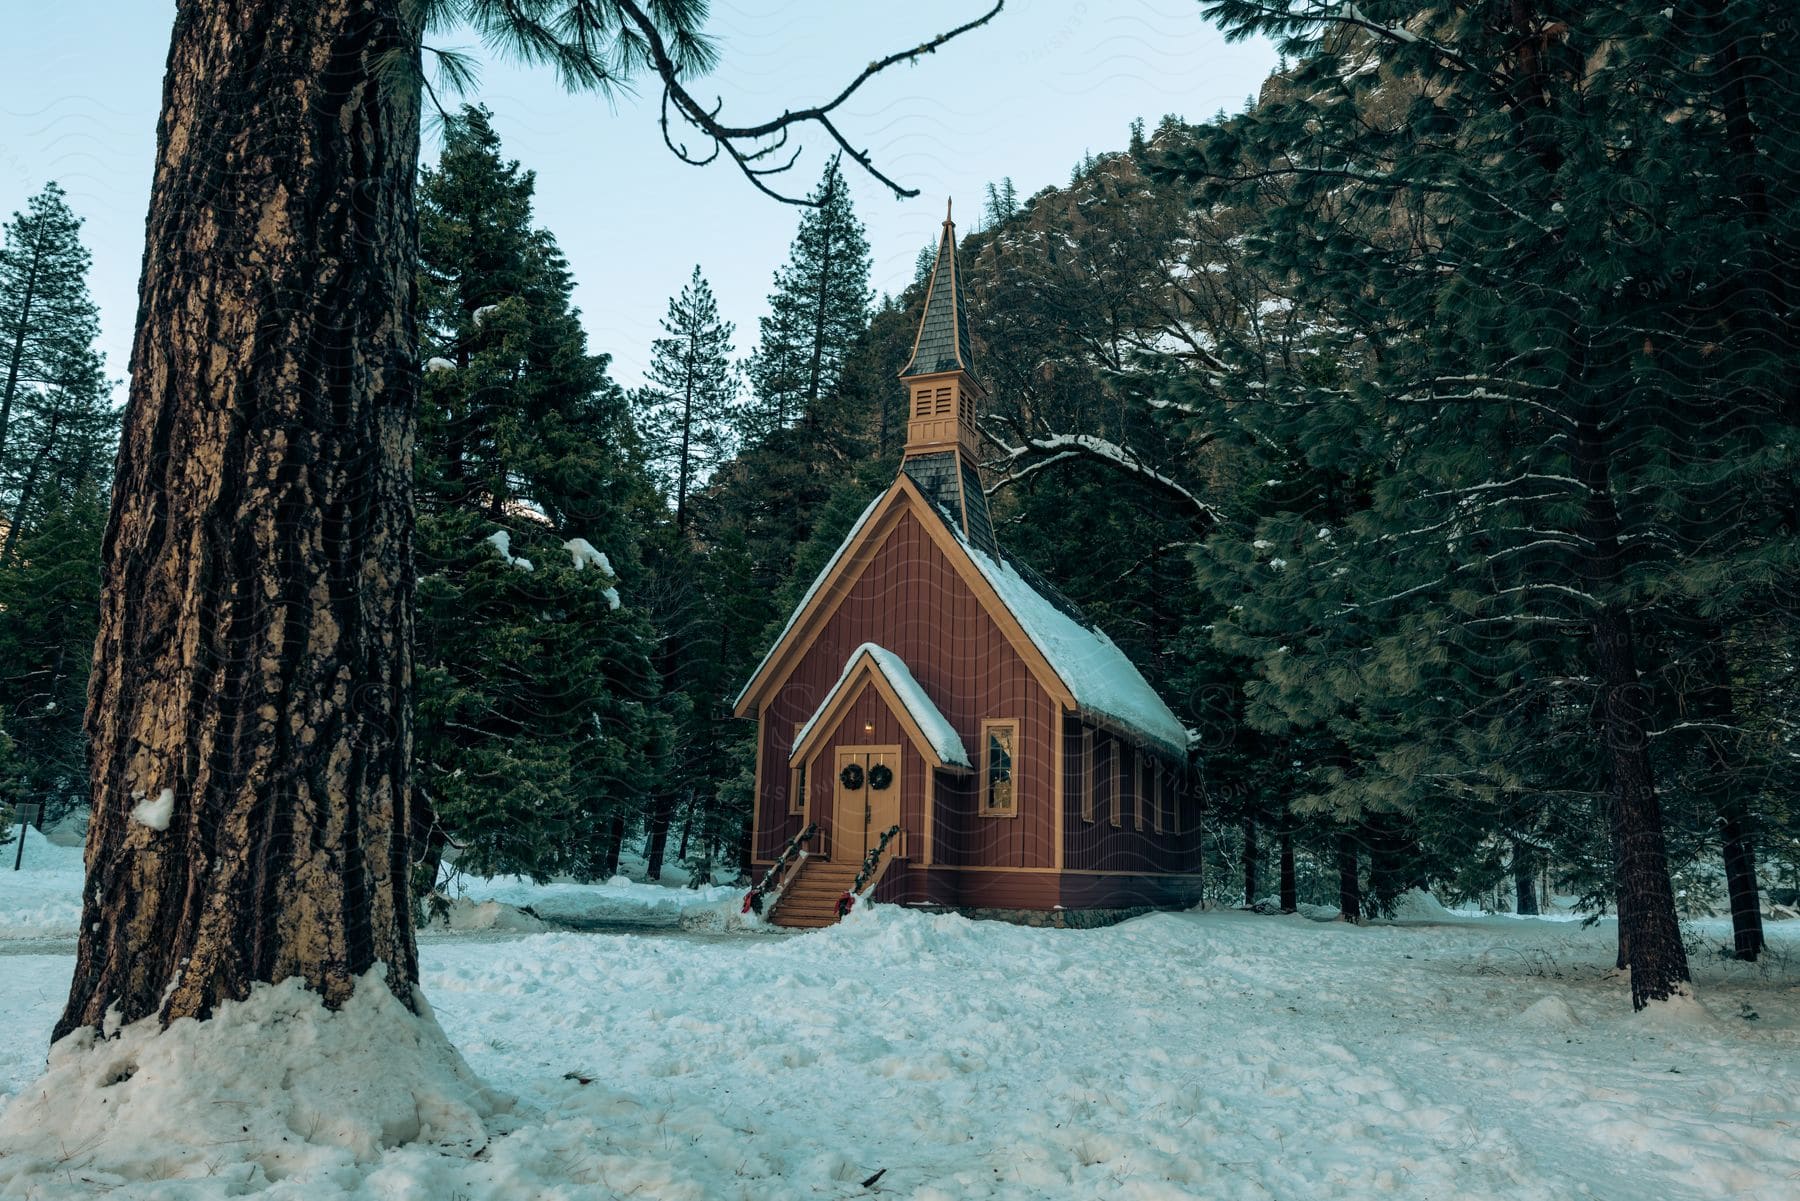 A church surrounded by trees in a winter forest